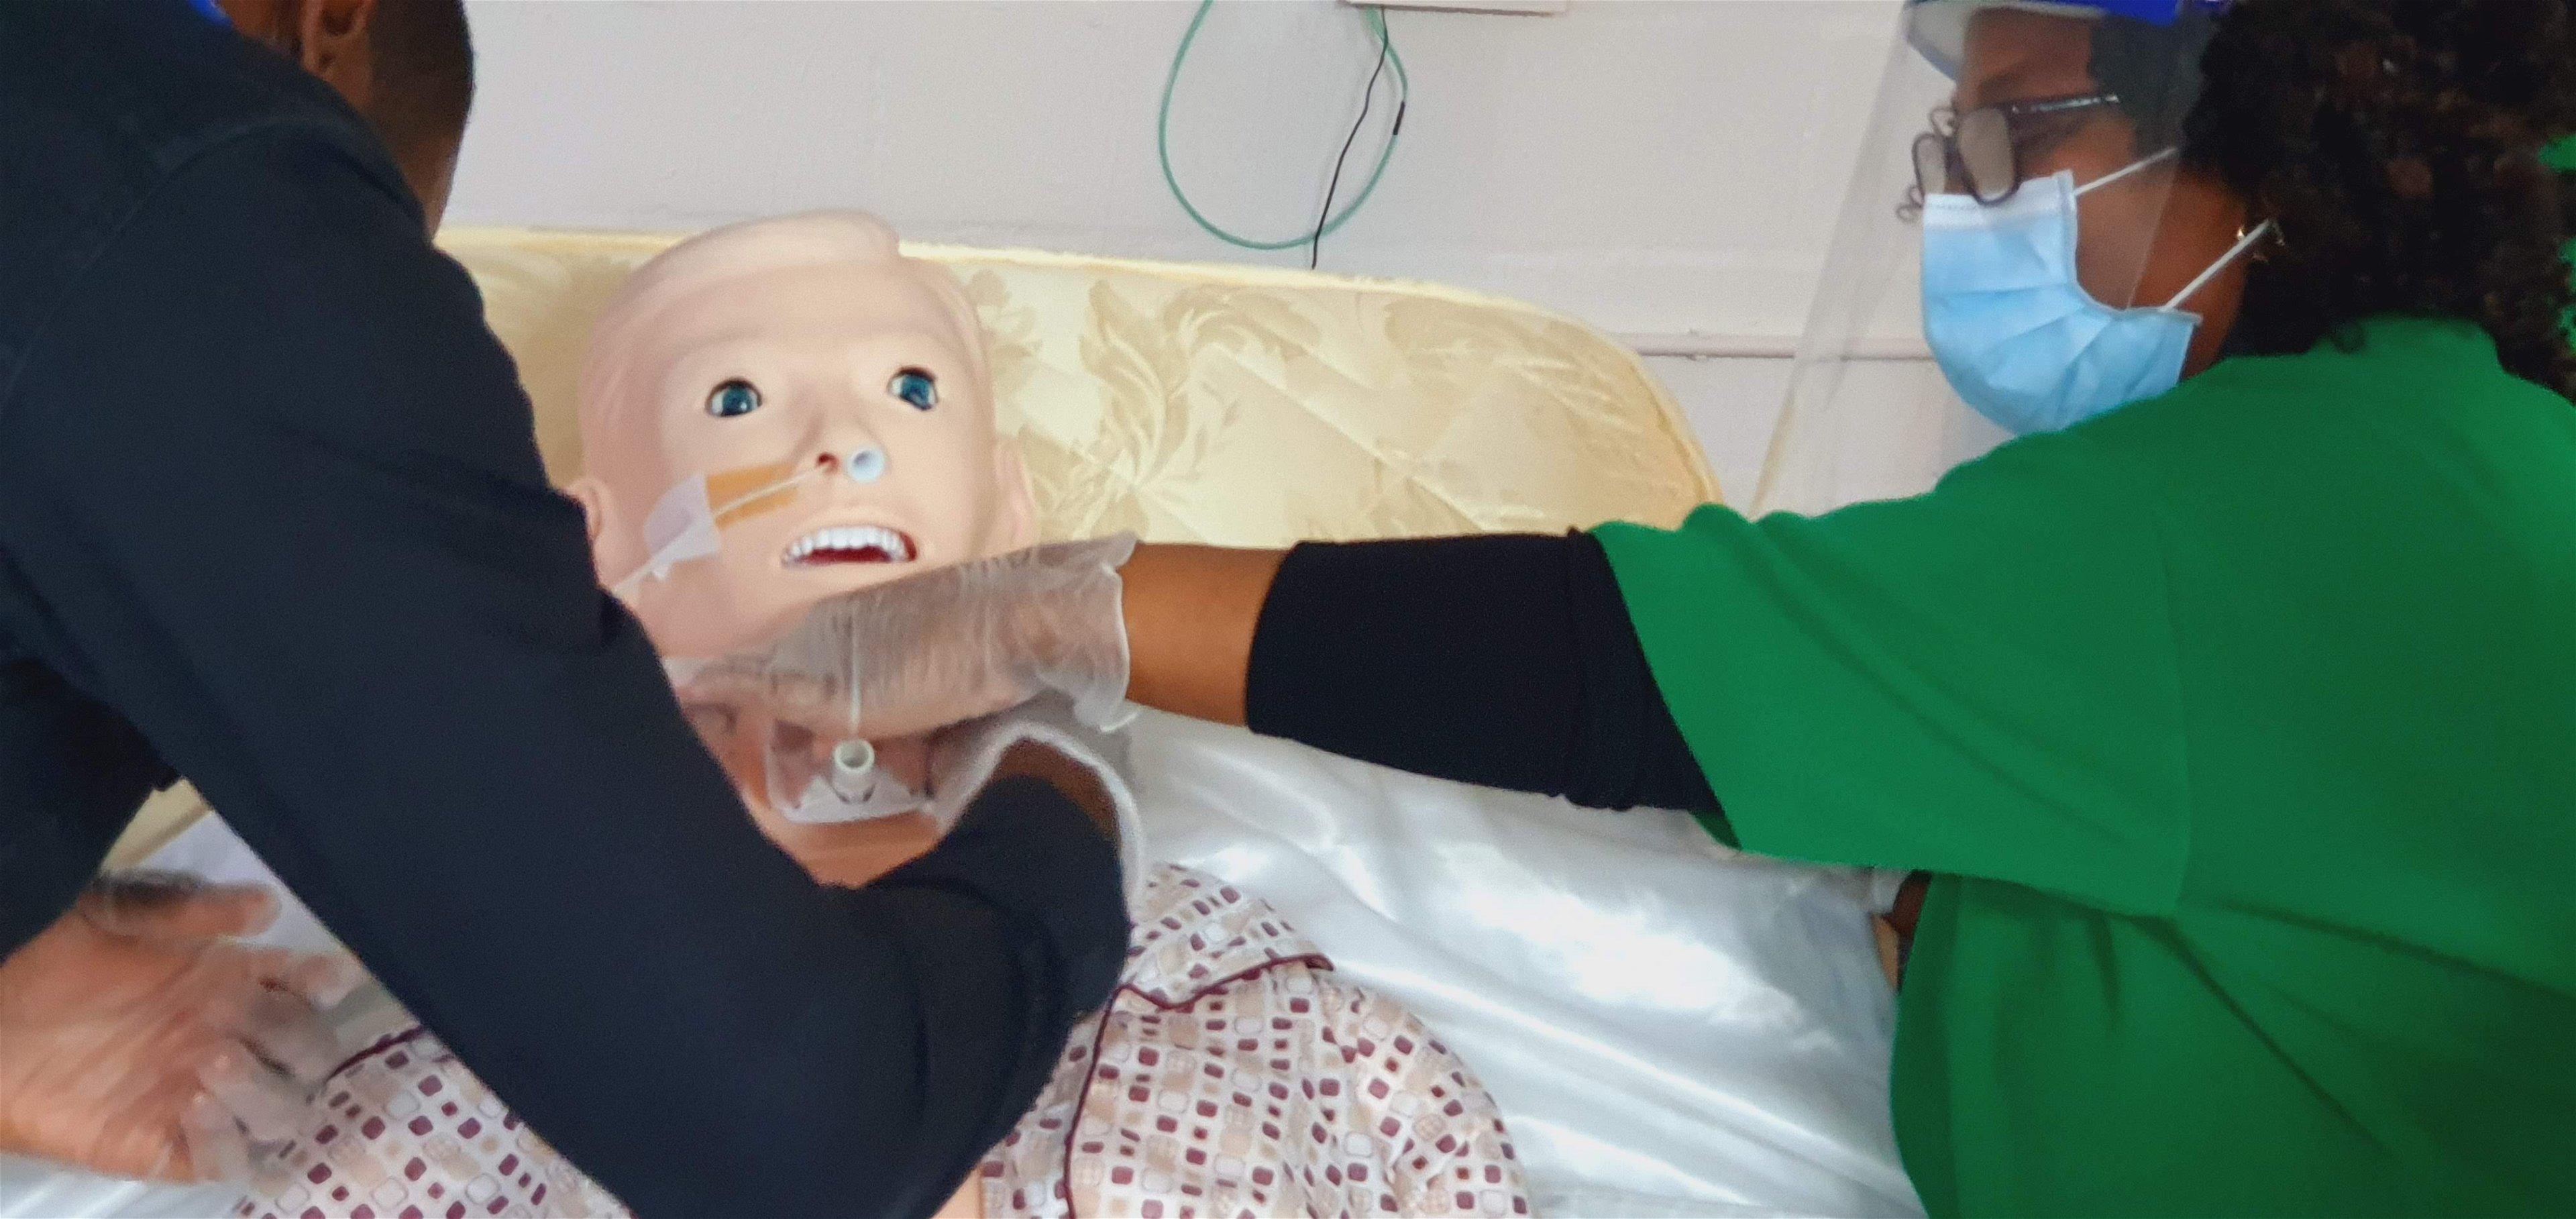 Adult Tracheostomy Care & Management